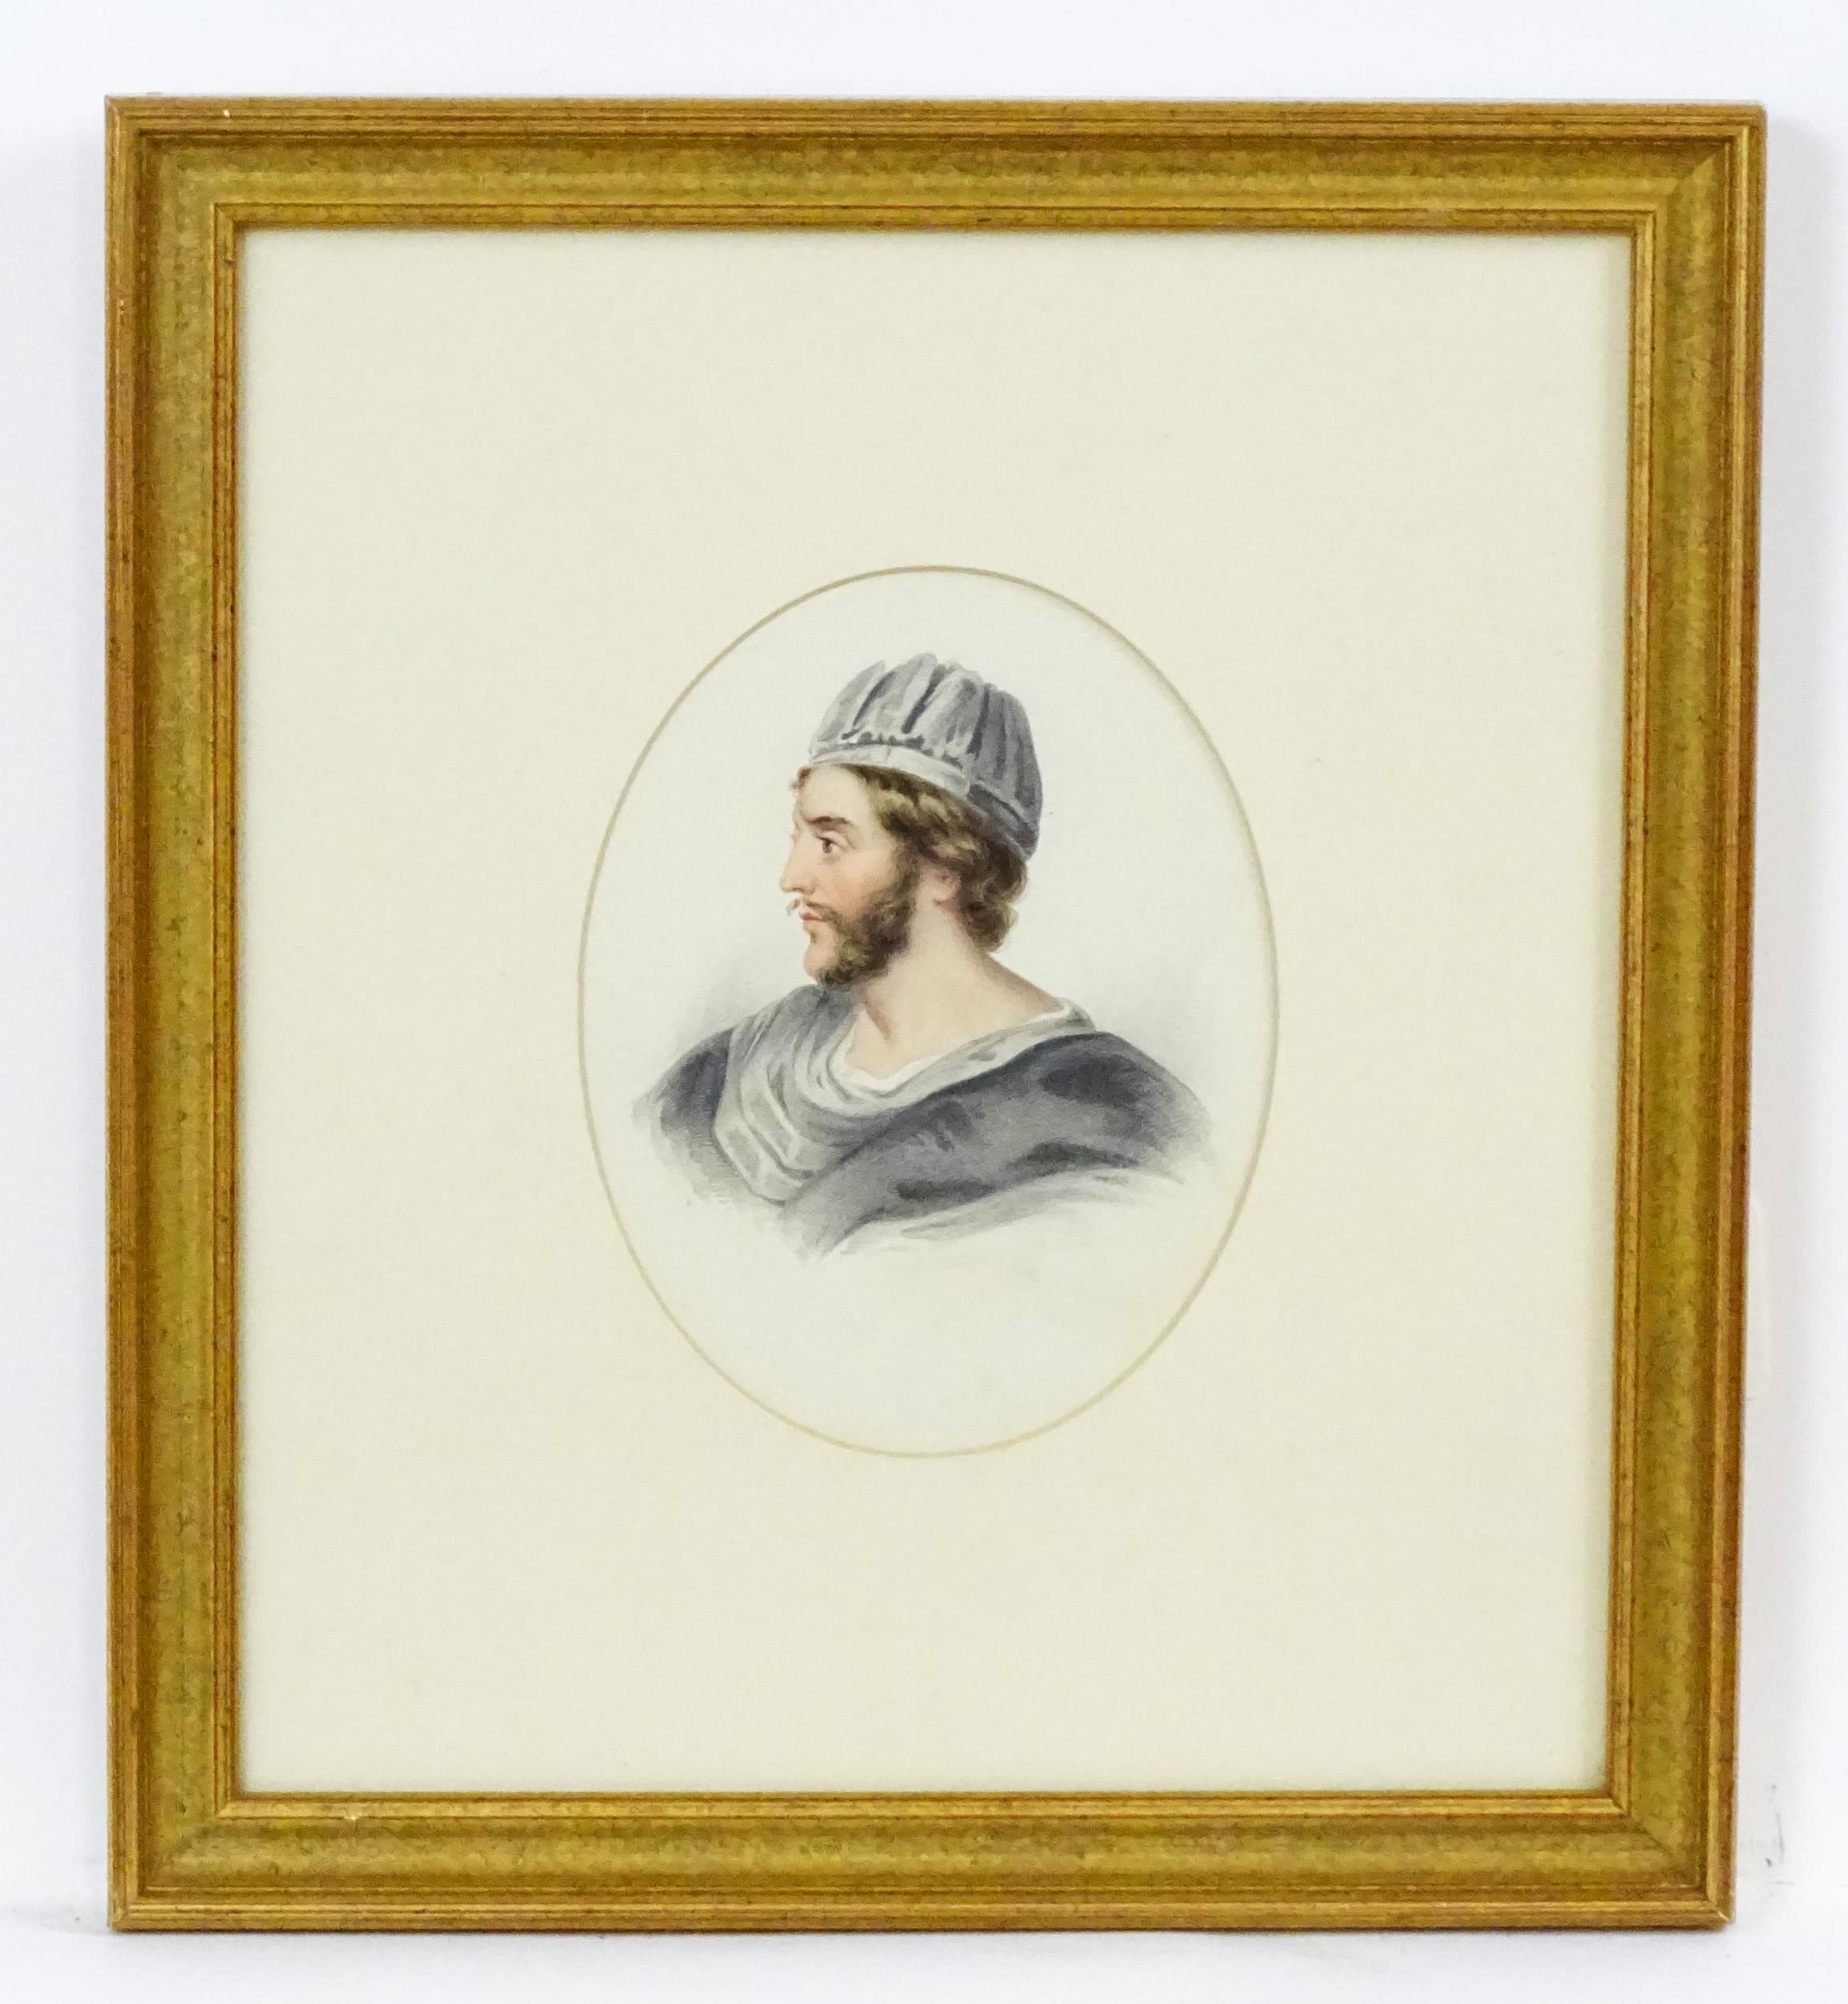 Early 20th century, Watercolour and pencil, A portrait of a young man with a beard and moustache